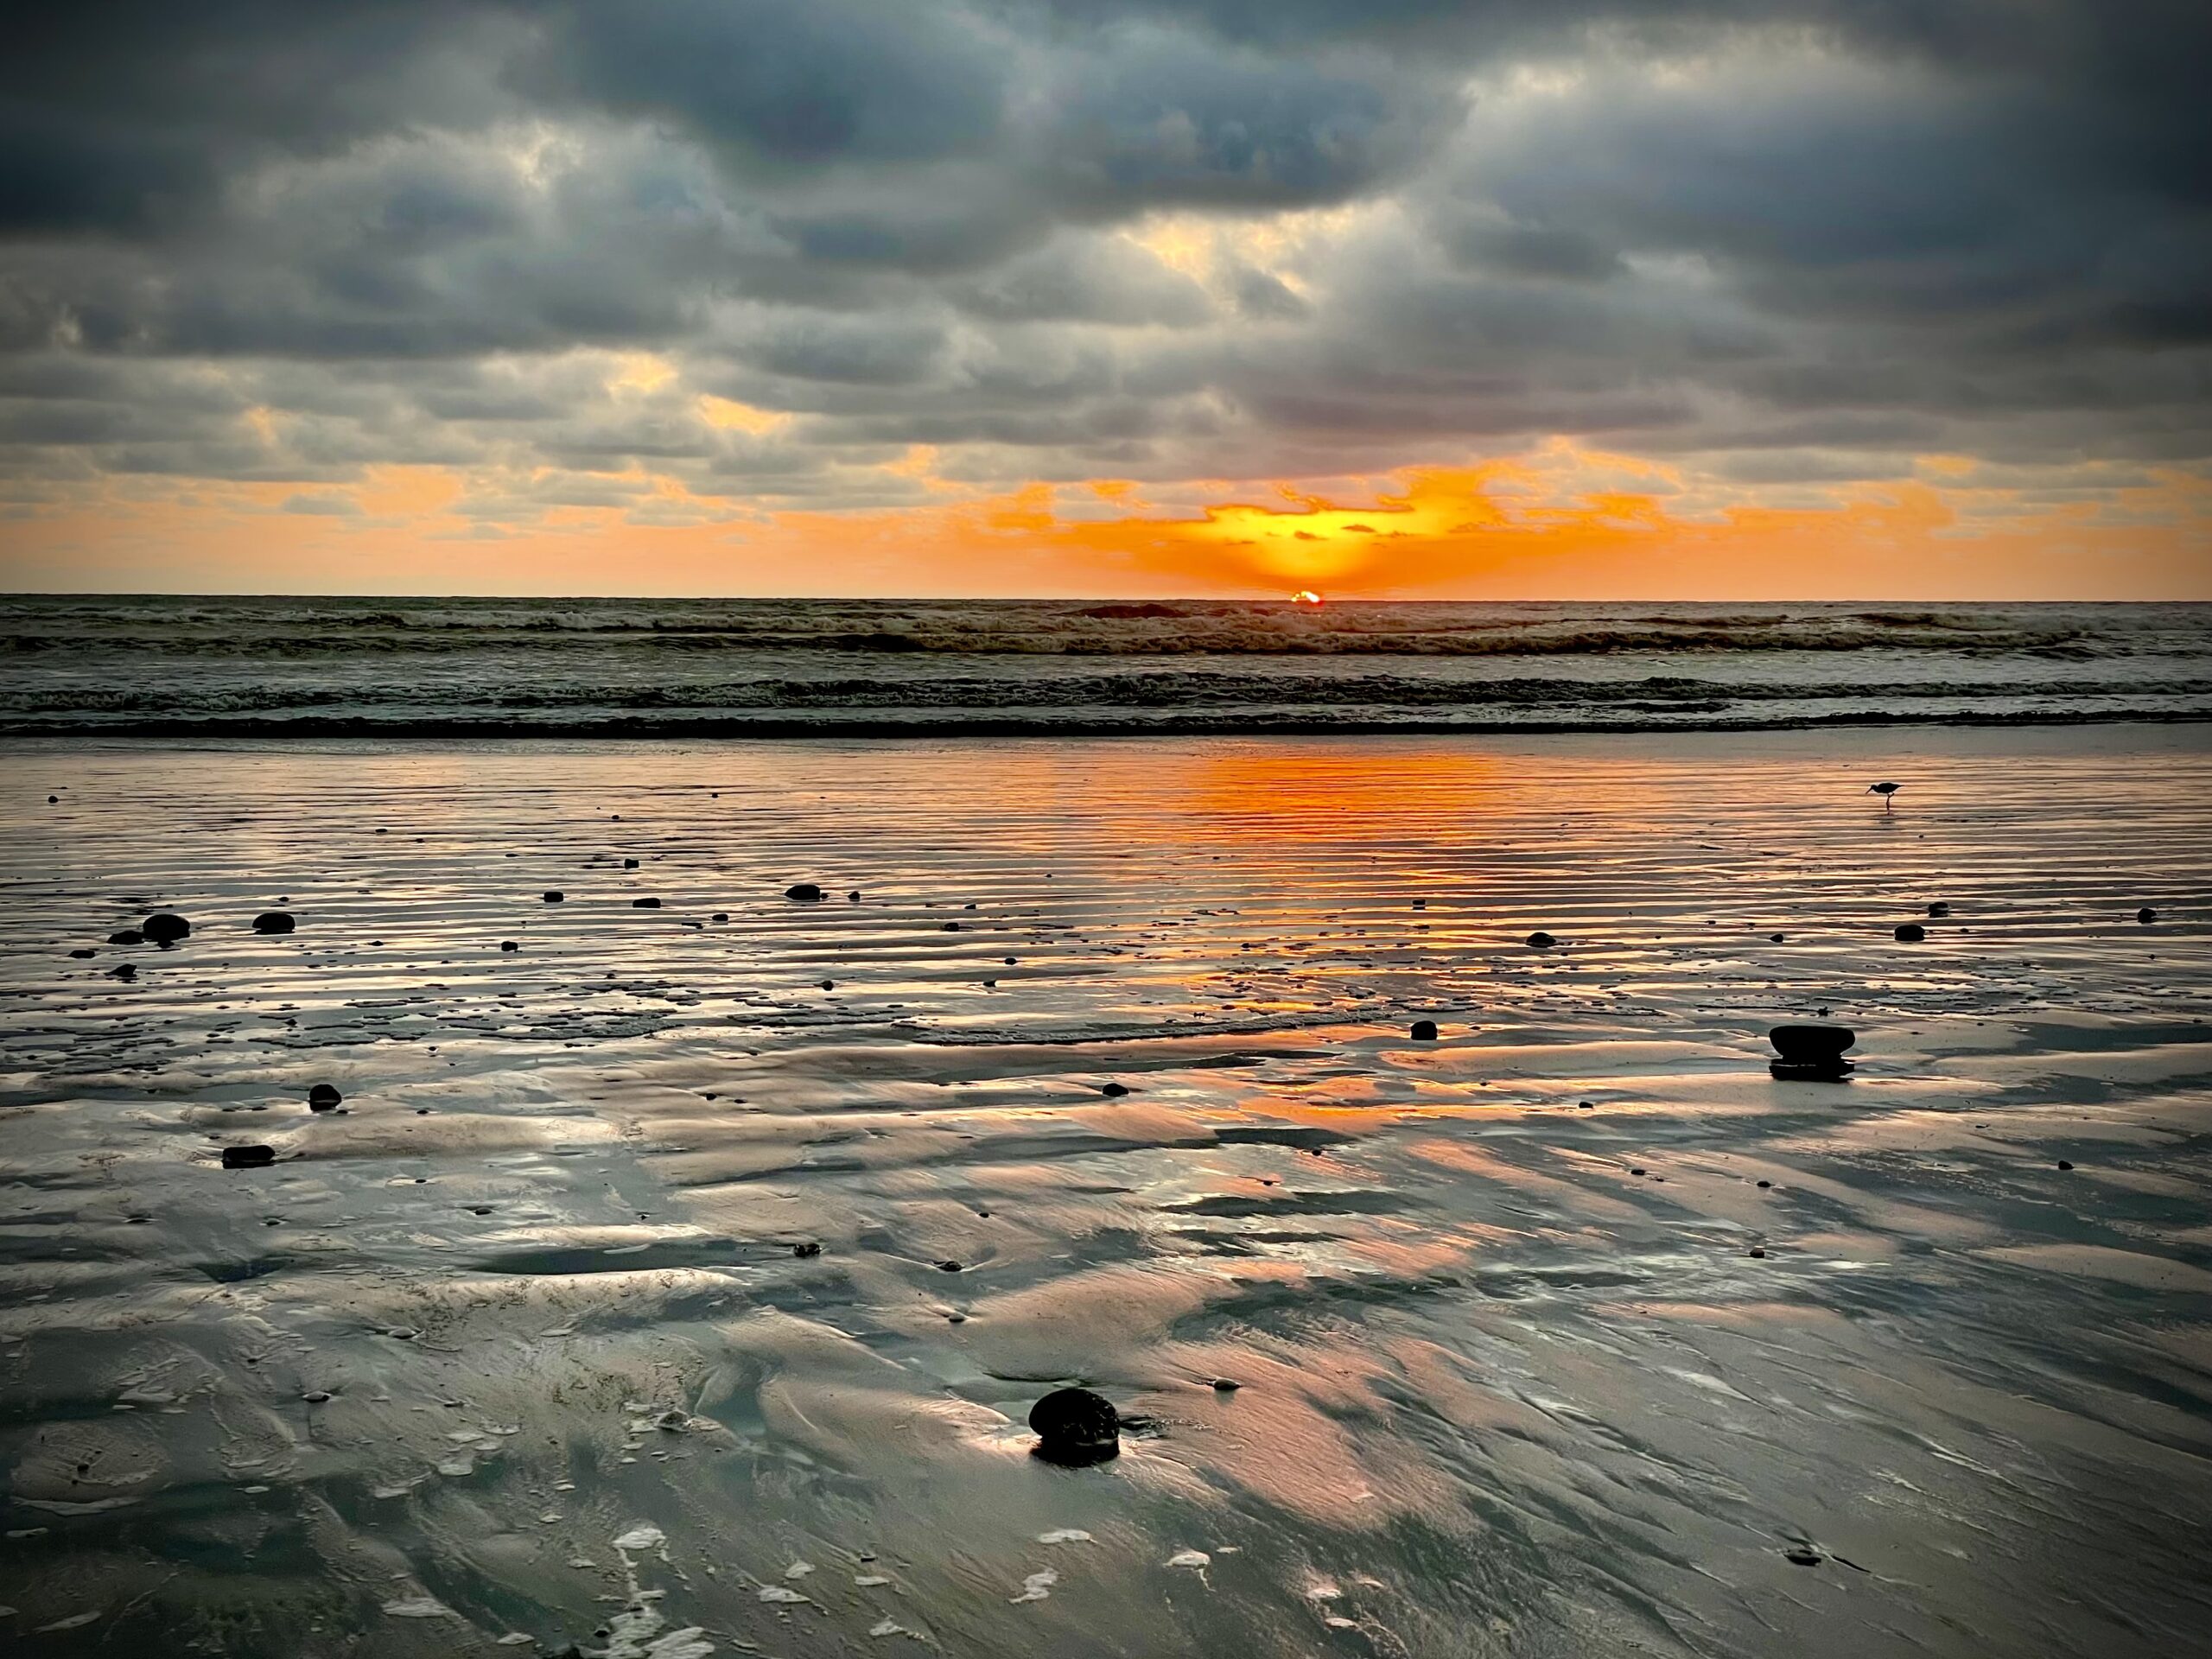 A beautiful sunset at low tide in Canoa